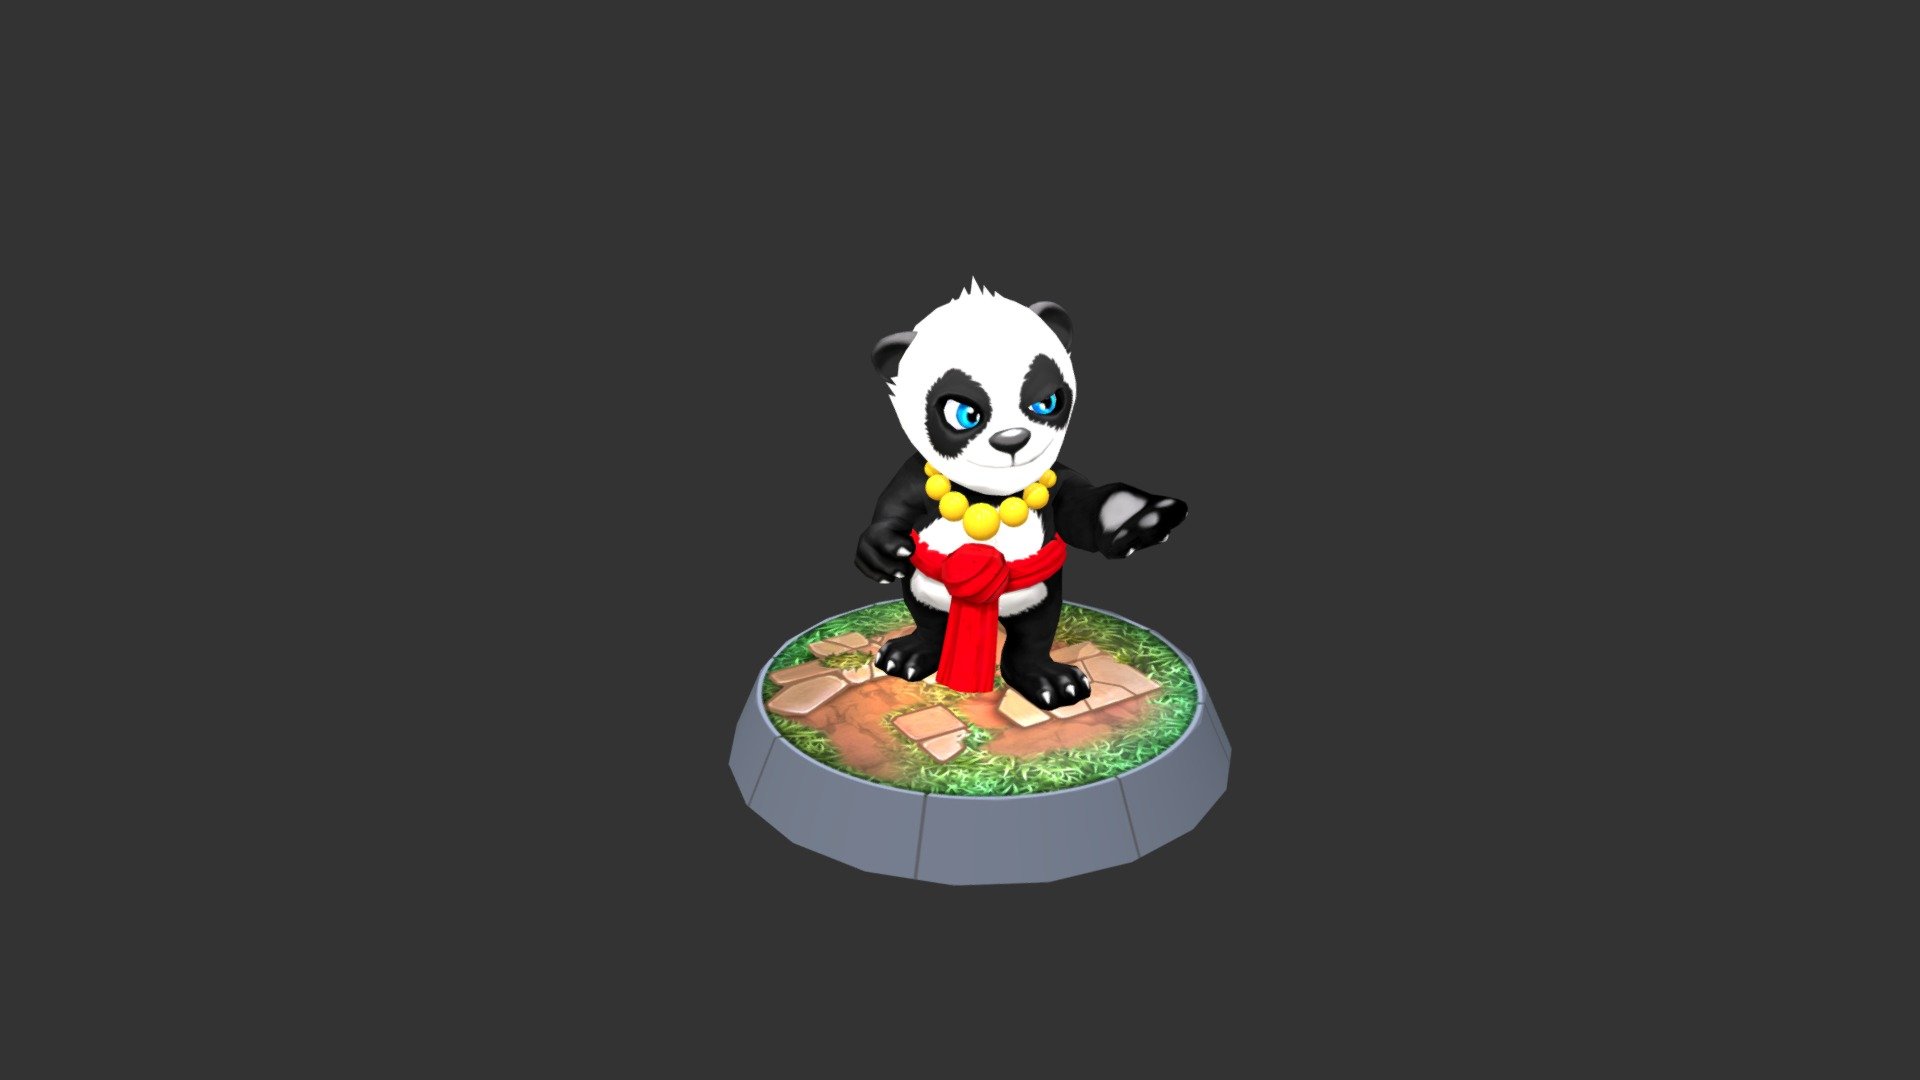 The Shaolin Panda. In the misty mountains lives a tribe of Pandas that have, over the years, trained in the art of Kung Fu. They train for 4 hours a day, eat and sleep the other 20 hours.

What did you expect? They are Pandas, they eat and sleep most of the time 3d model